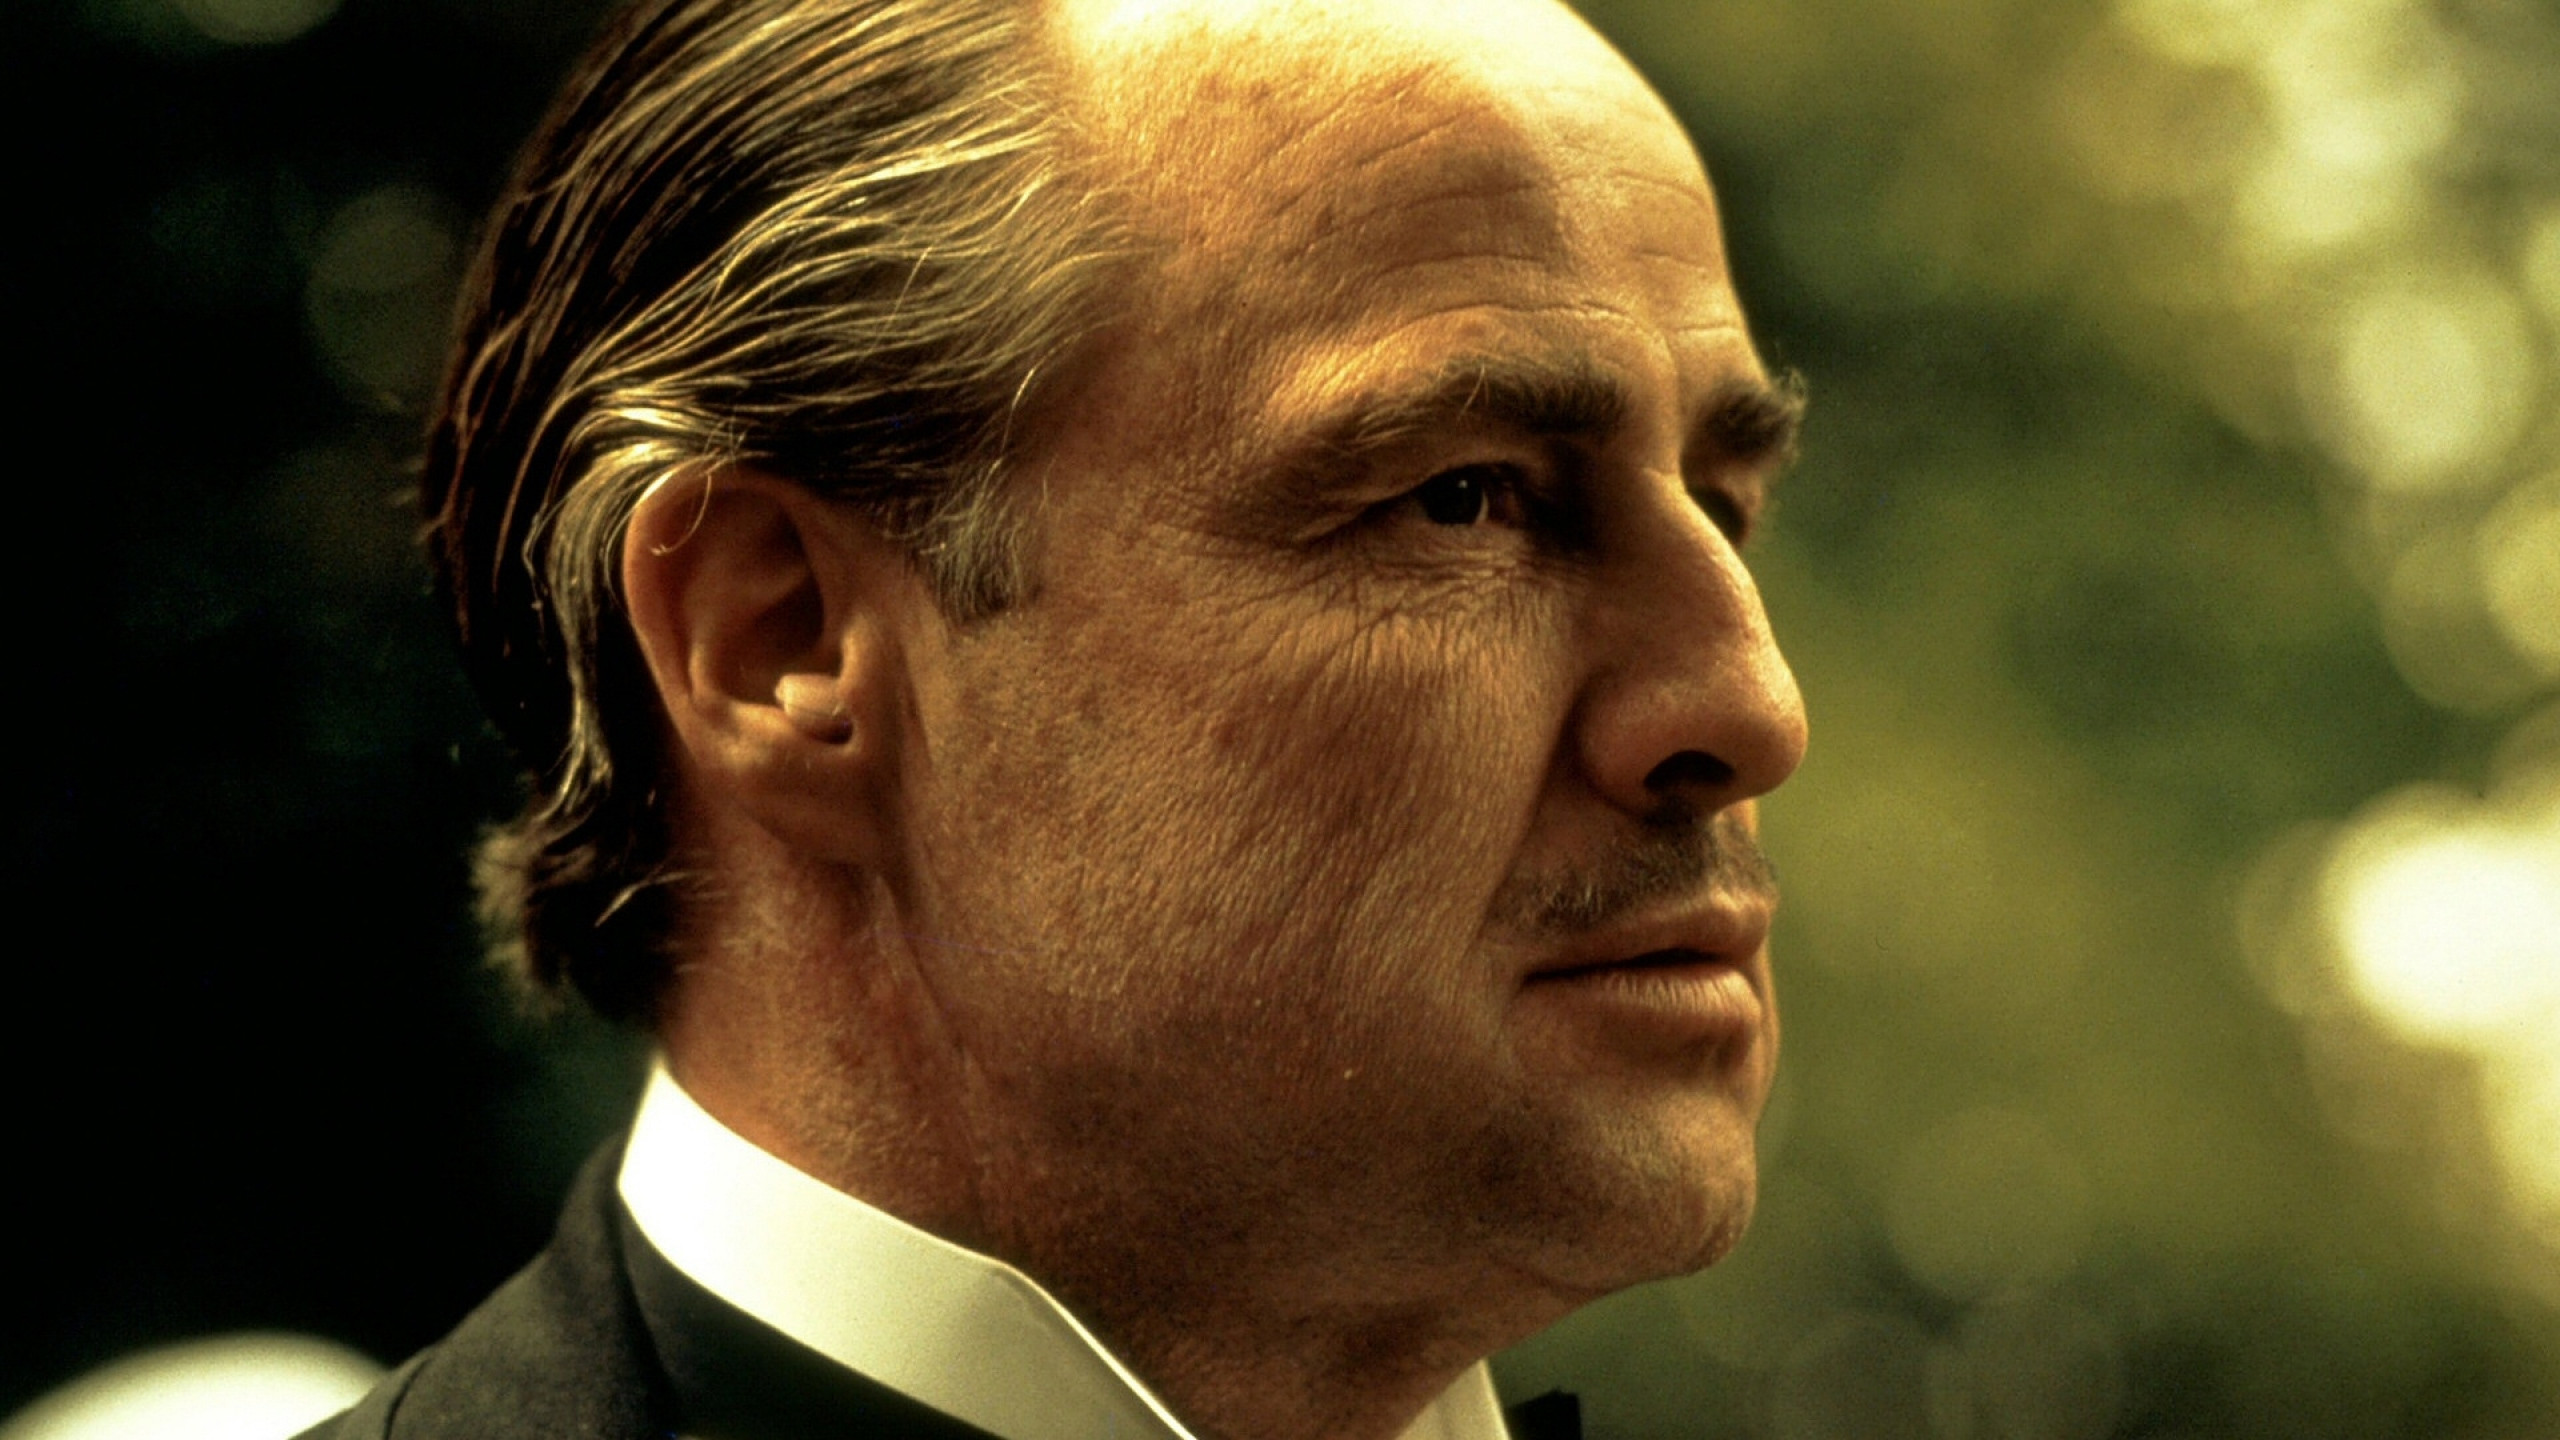 Painting  Marlon Brando  Godfather  Hollywood Collection  Large Art  Prints by Bethany Morrison  Buy Posters Frames Canvas  Digital Art  Prints  Small Compact Medium and Large Variants